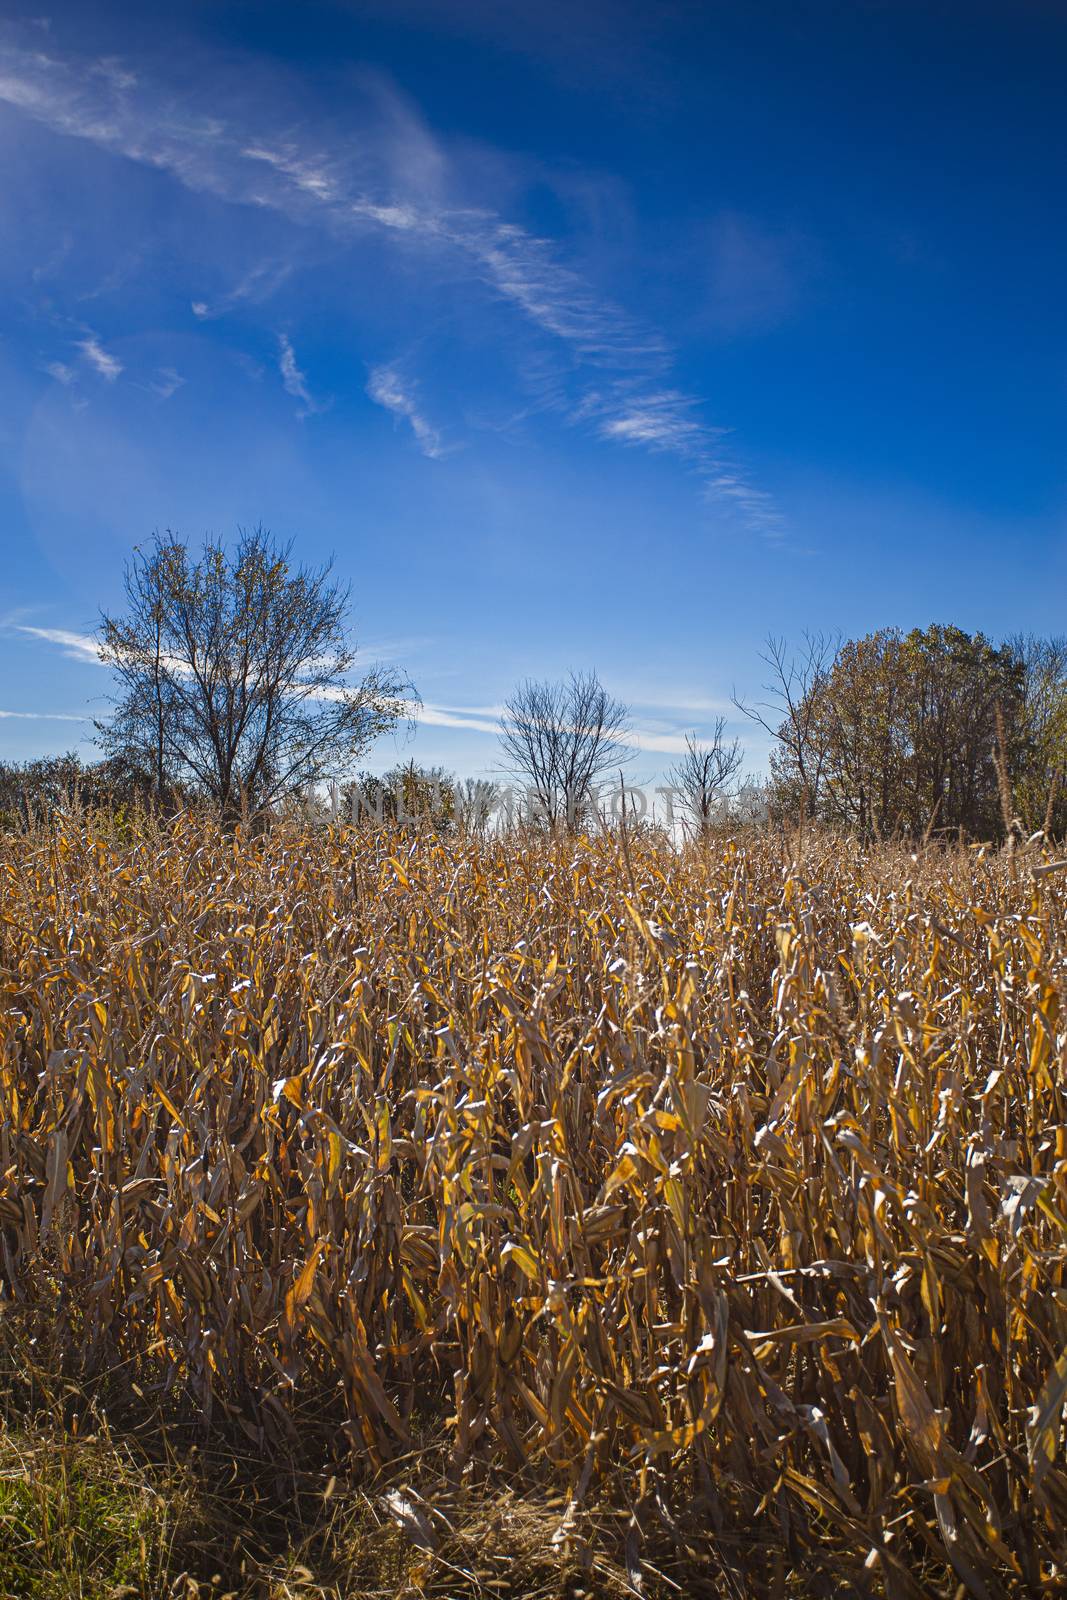 Field of dry corn, golden color, against a blue sky